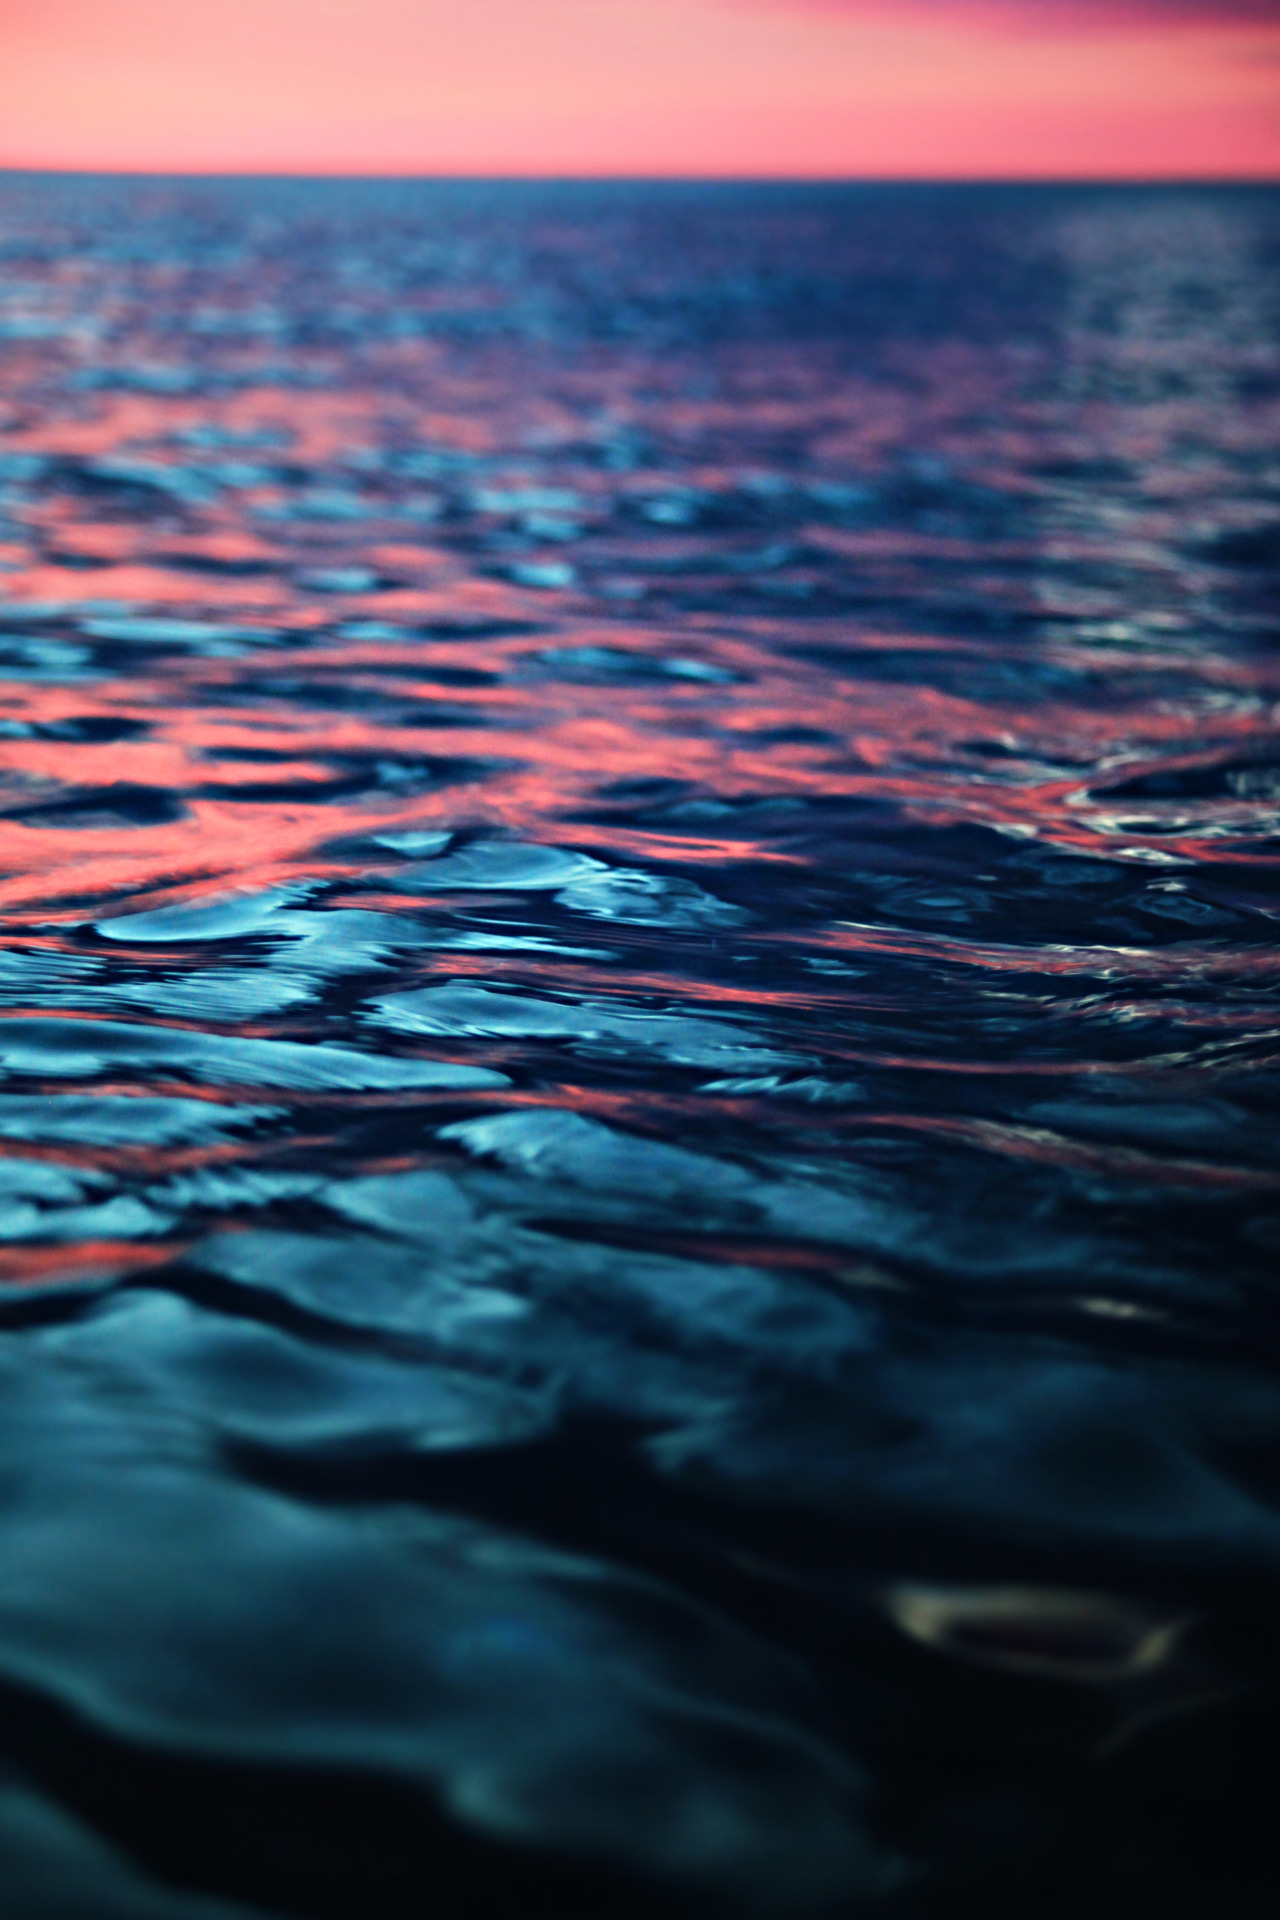 highenoughtoseethesea: Sunset, from the (43-degree) water. 